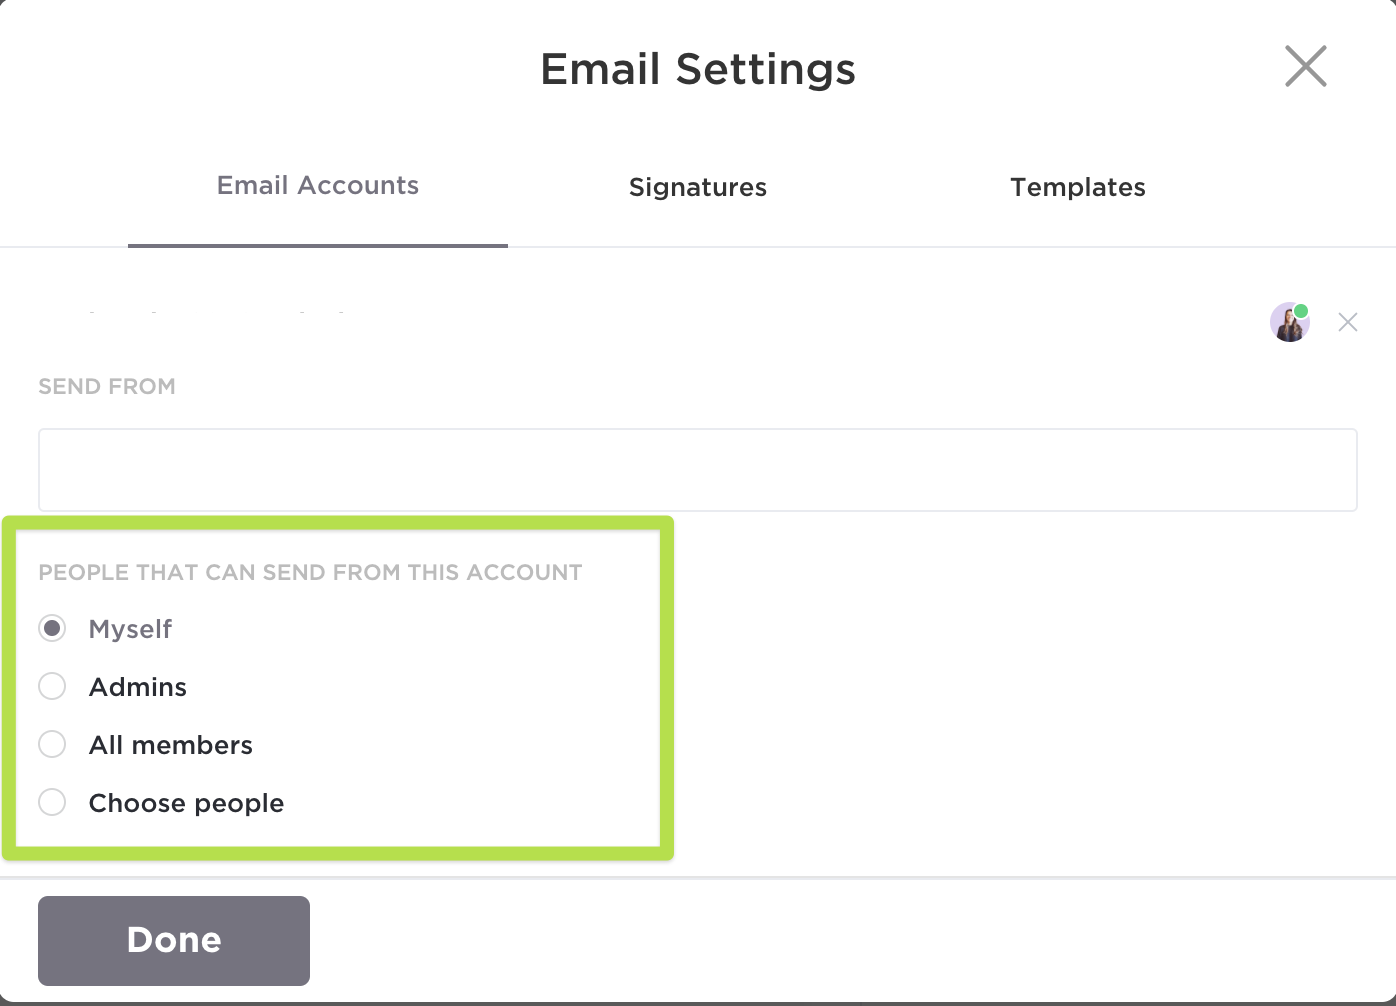 Screenshot of the options for who can send emails from a particular email account in ClickUp.